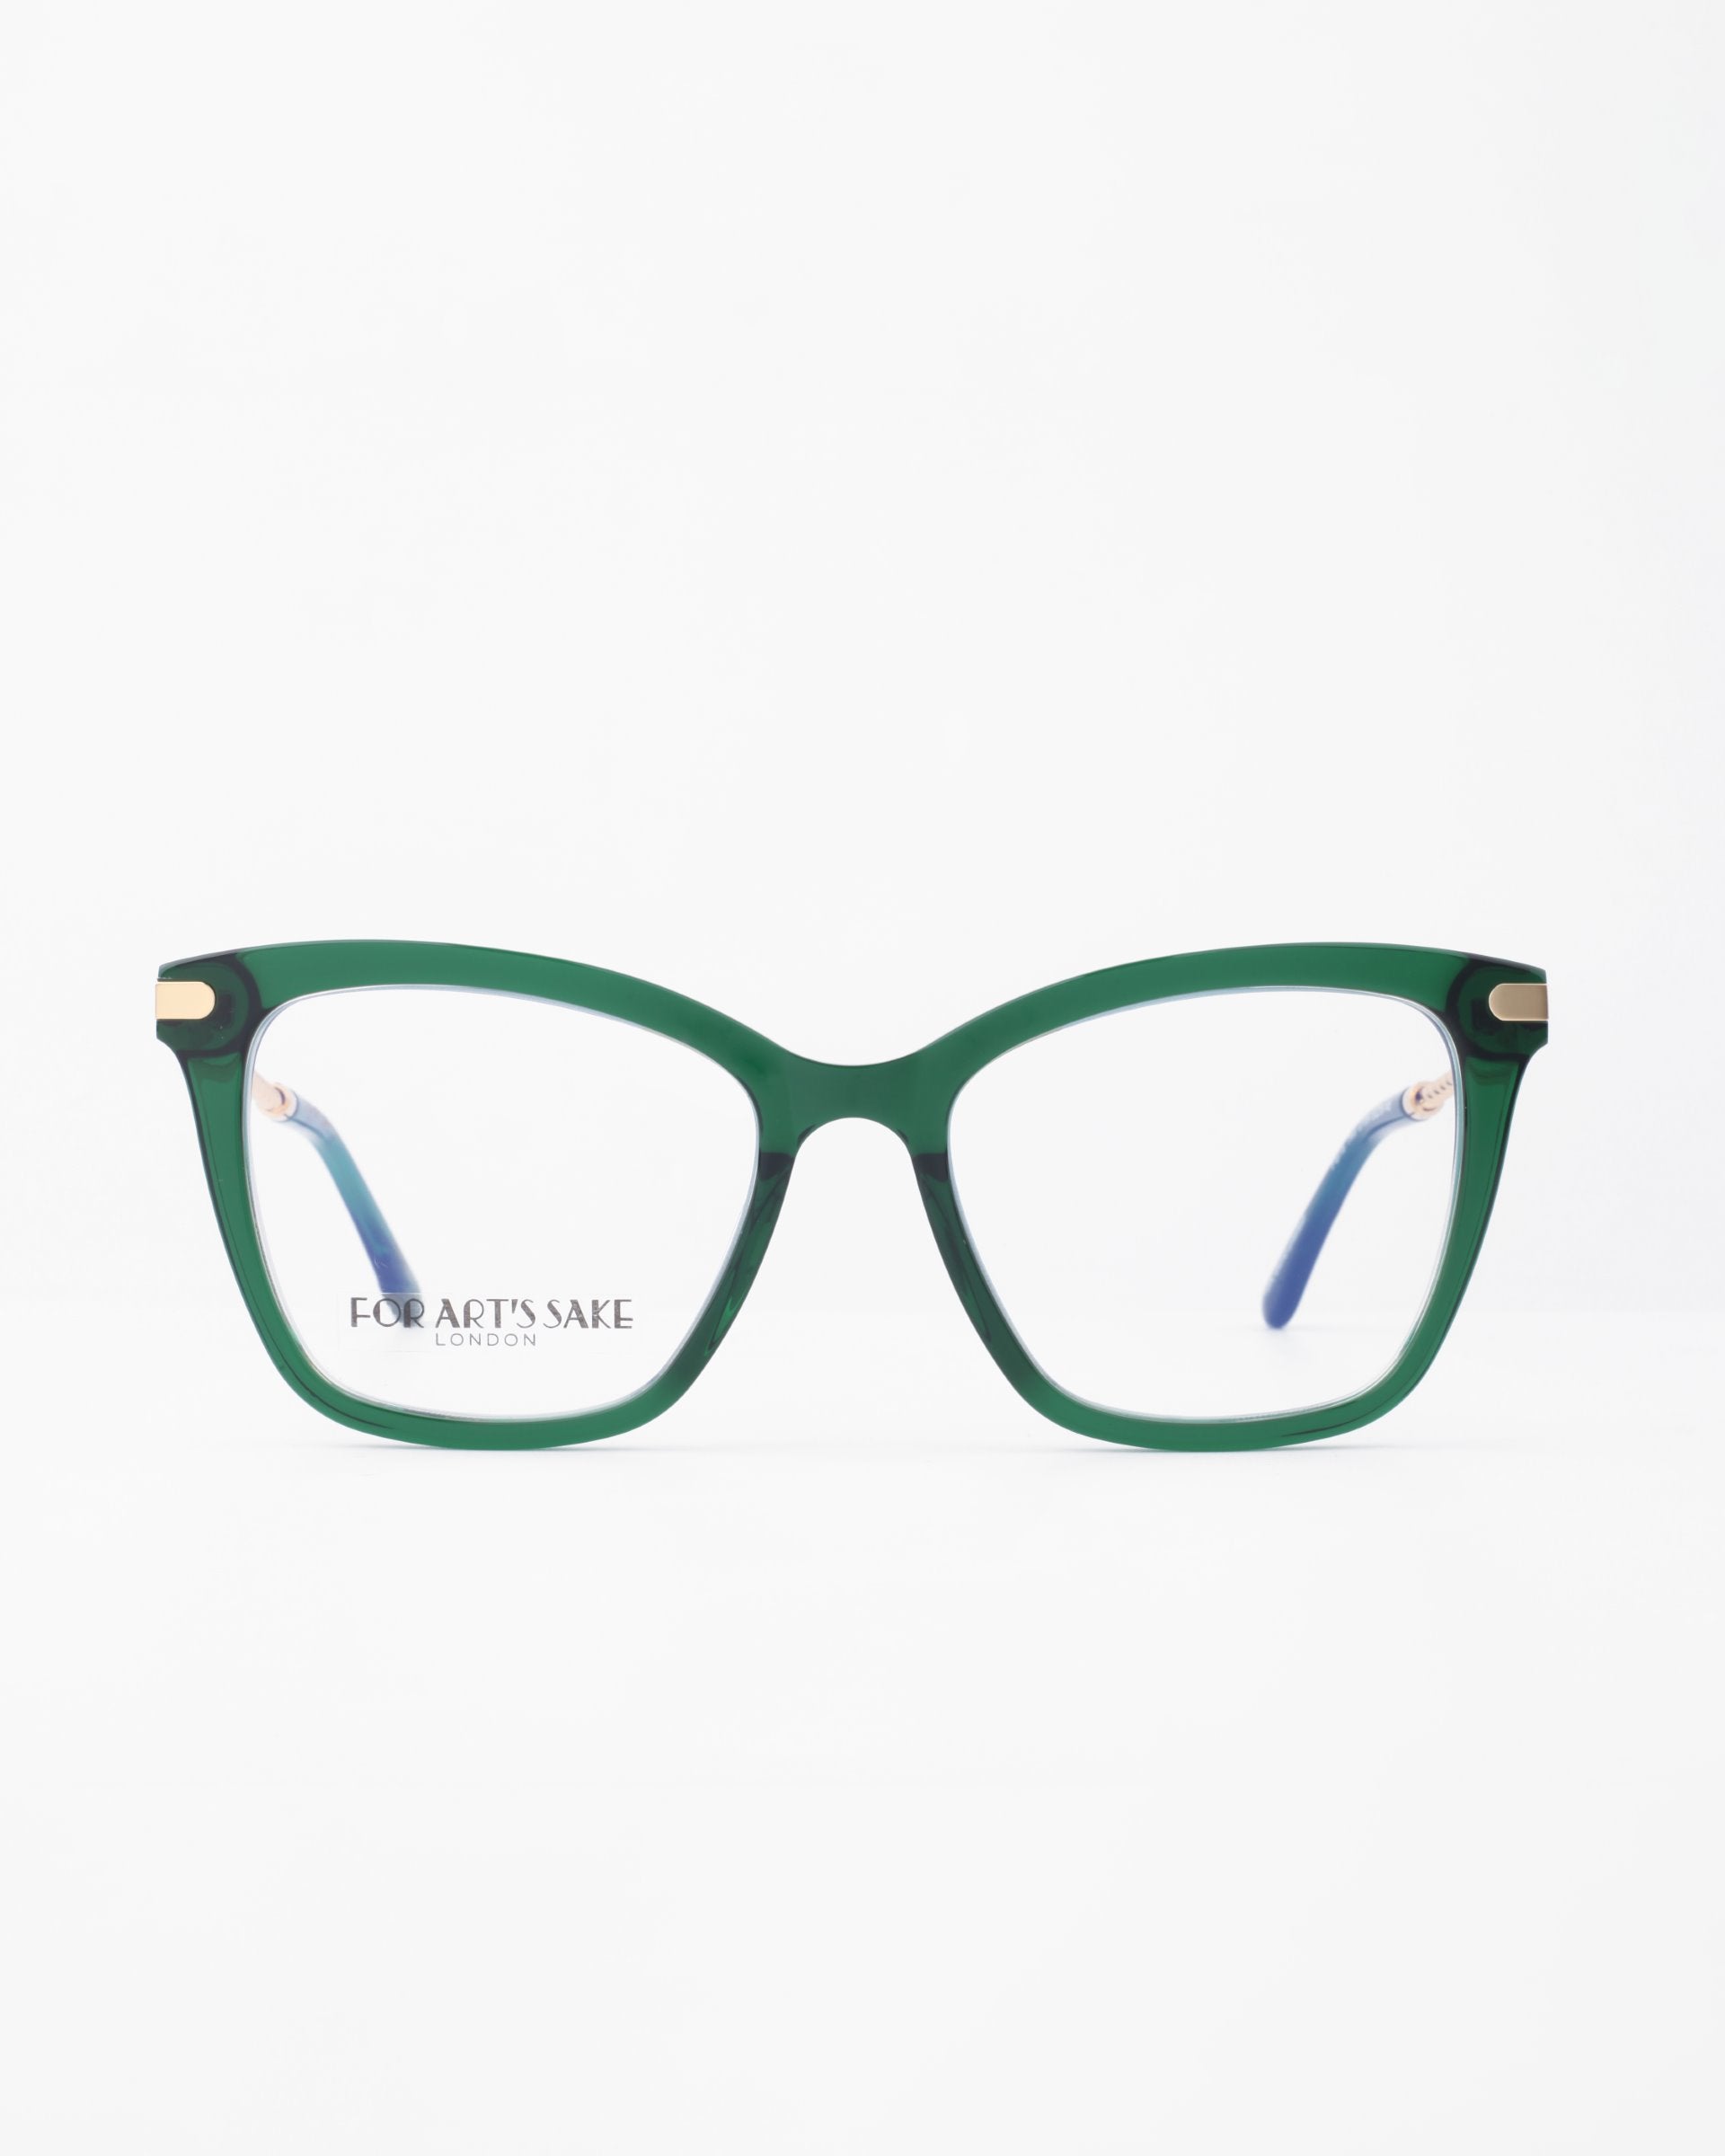 A pair of green-rimmed Paris Two eyeglasses by For Art's Sake® displayed against a plain white background. The glasses have a square frame with blue temple tips and feature a blue light filter for added protection.